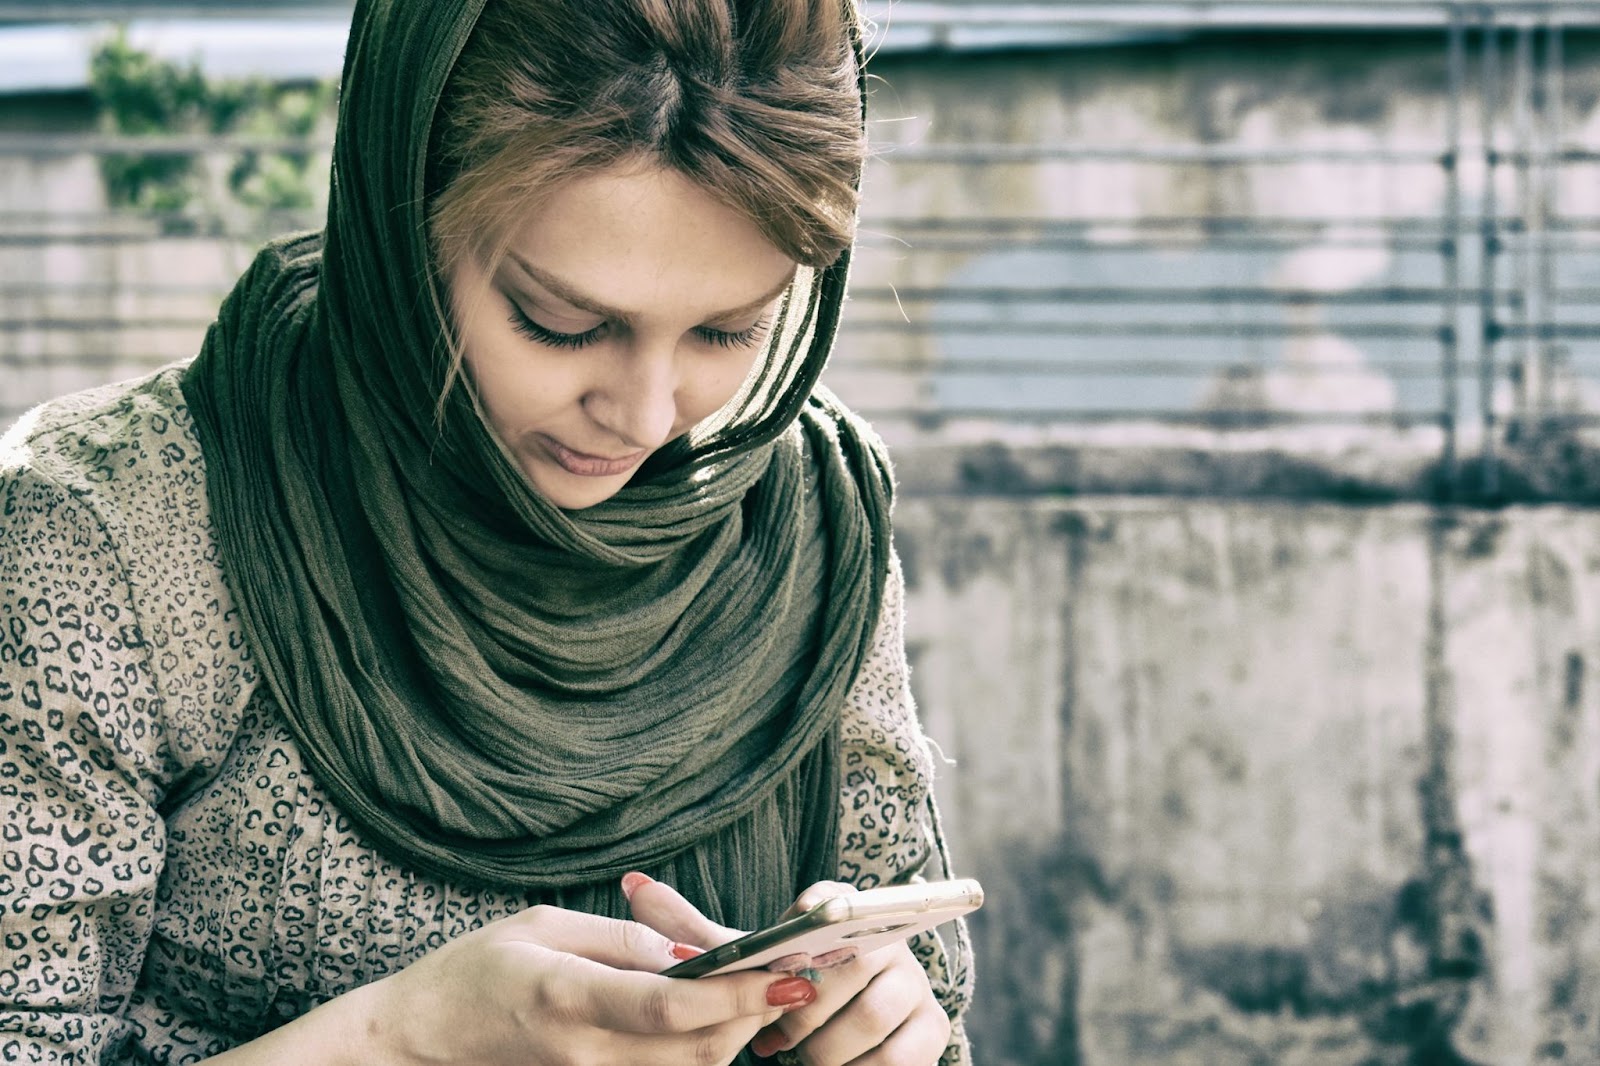 Woman walking through town wearing a hijab while looking at her smartphone.